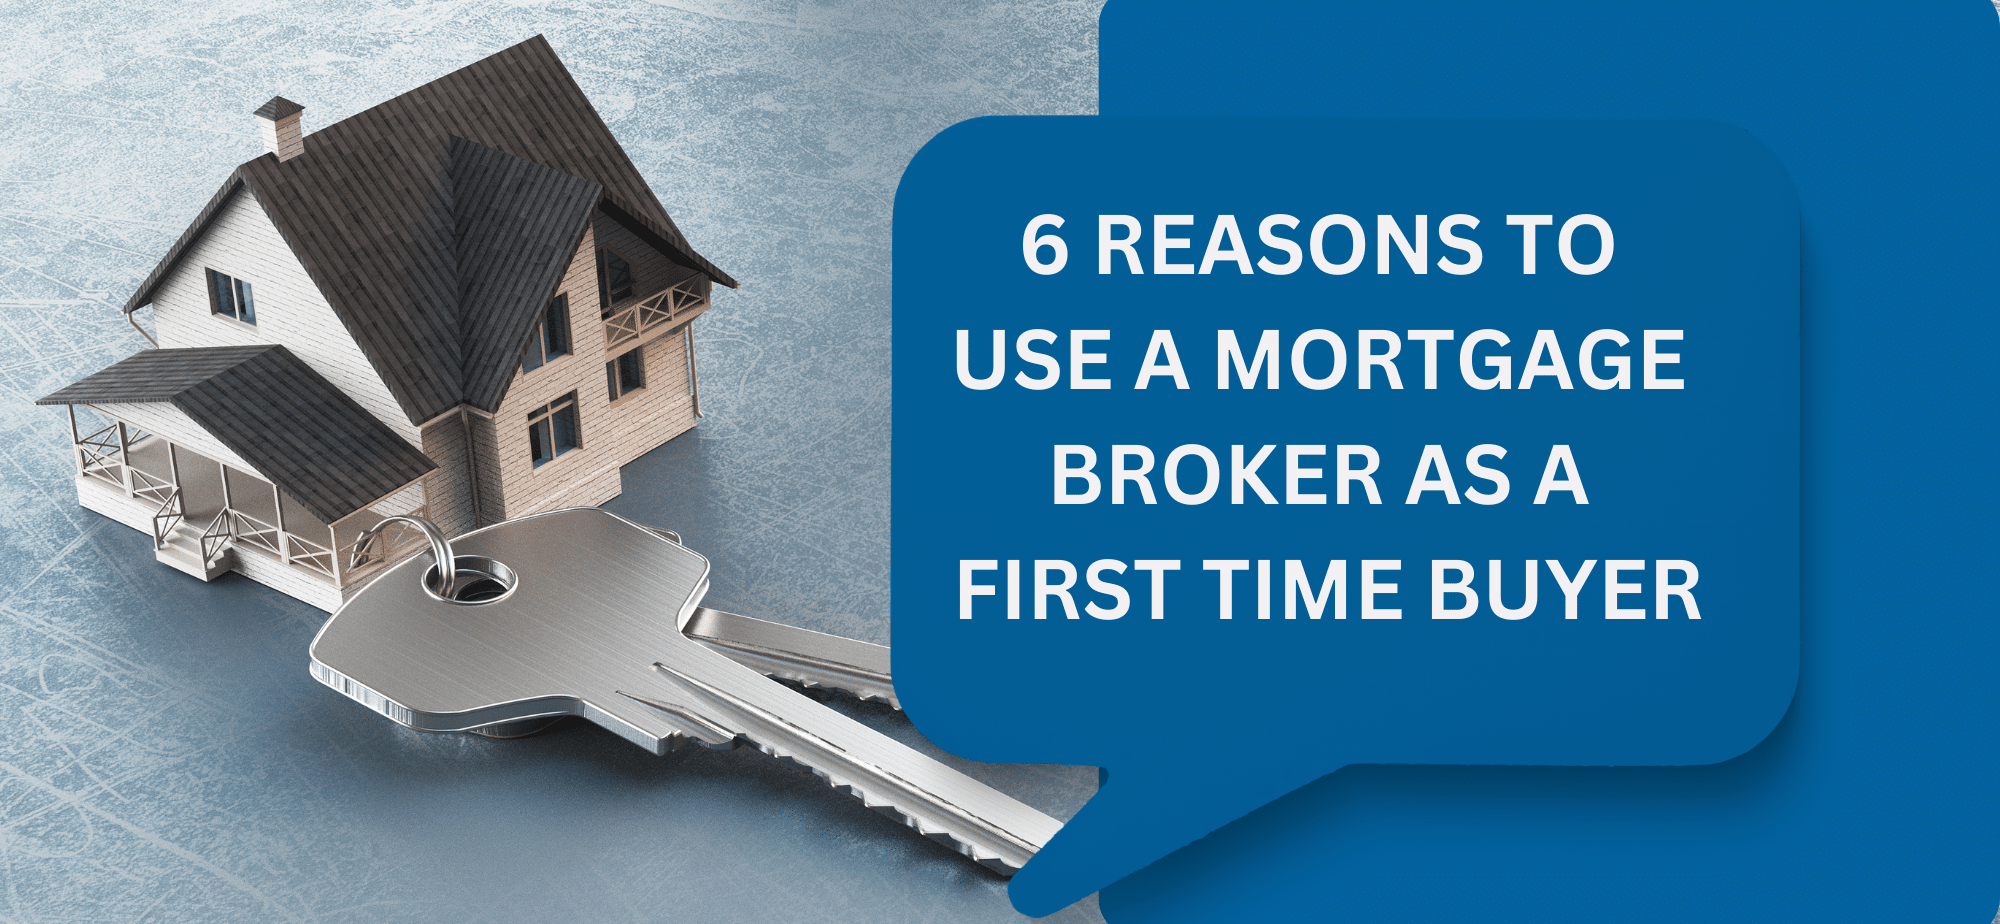 6 reasons to use a mortgage broker as a First Time Buyer